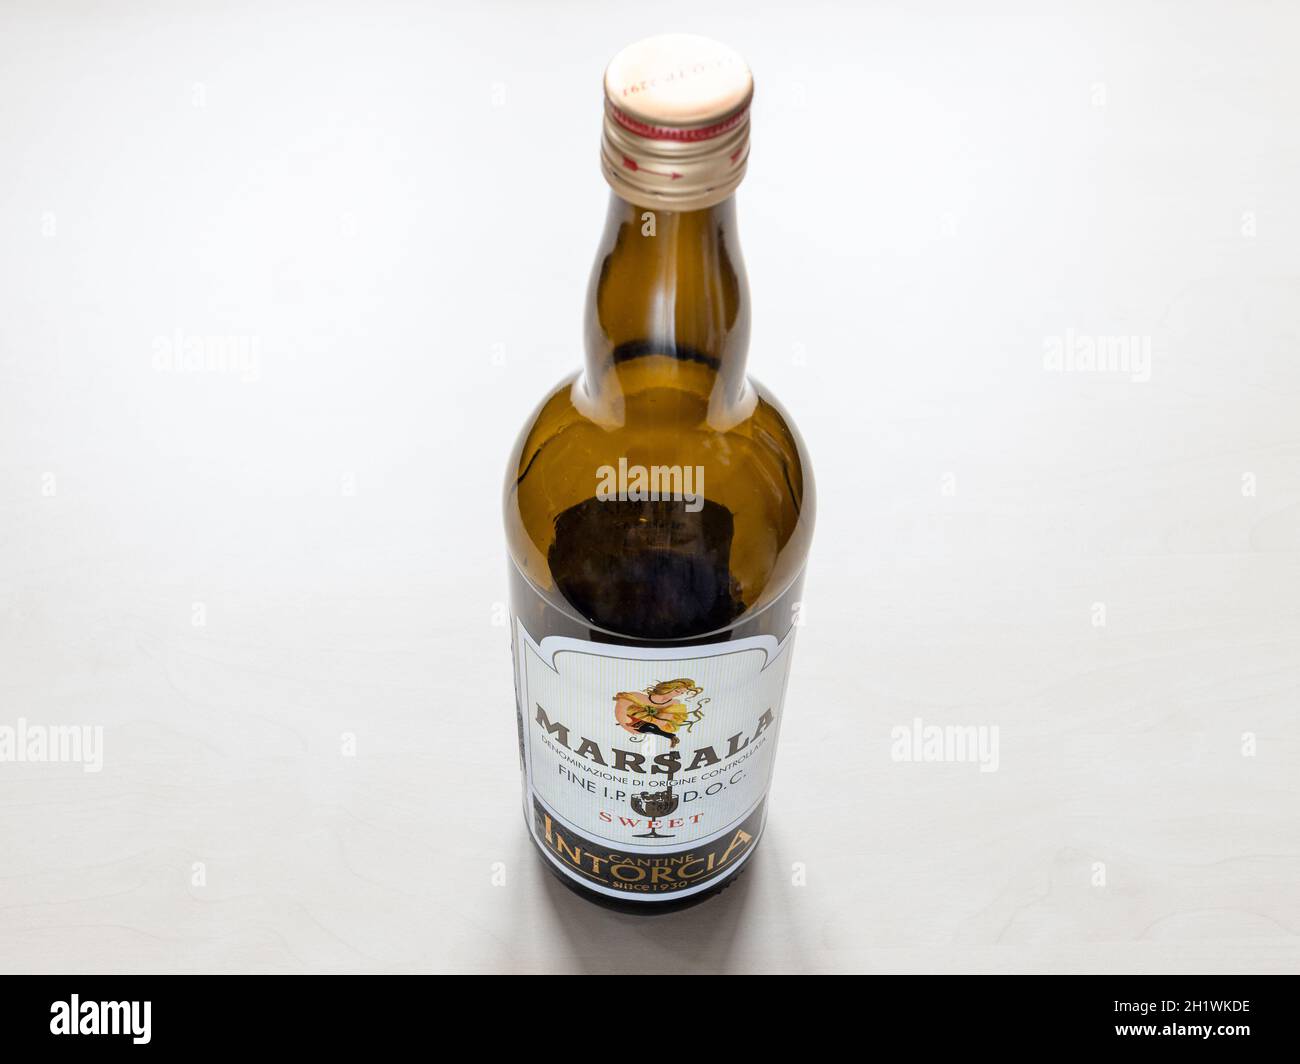 MOSCOW, RUSSIA - JUNE 10, 2021: empty bottle of sweet Marsala from Cantine Intorcia. Marsala is fortified wine, produced in the region surrounding of Stock Photo